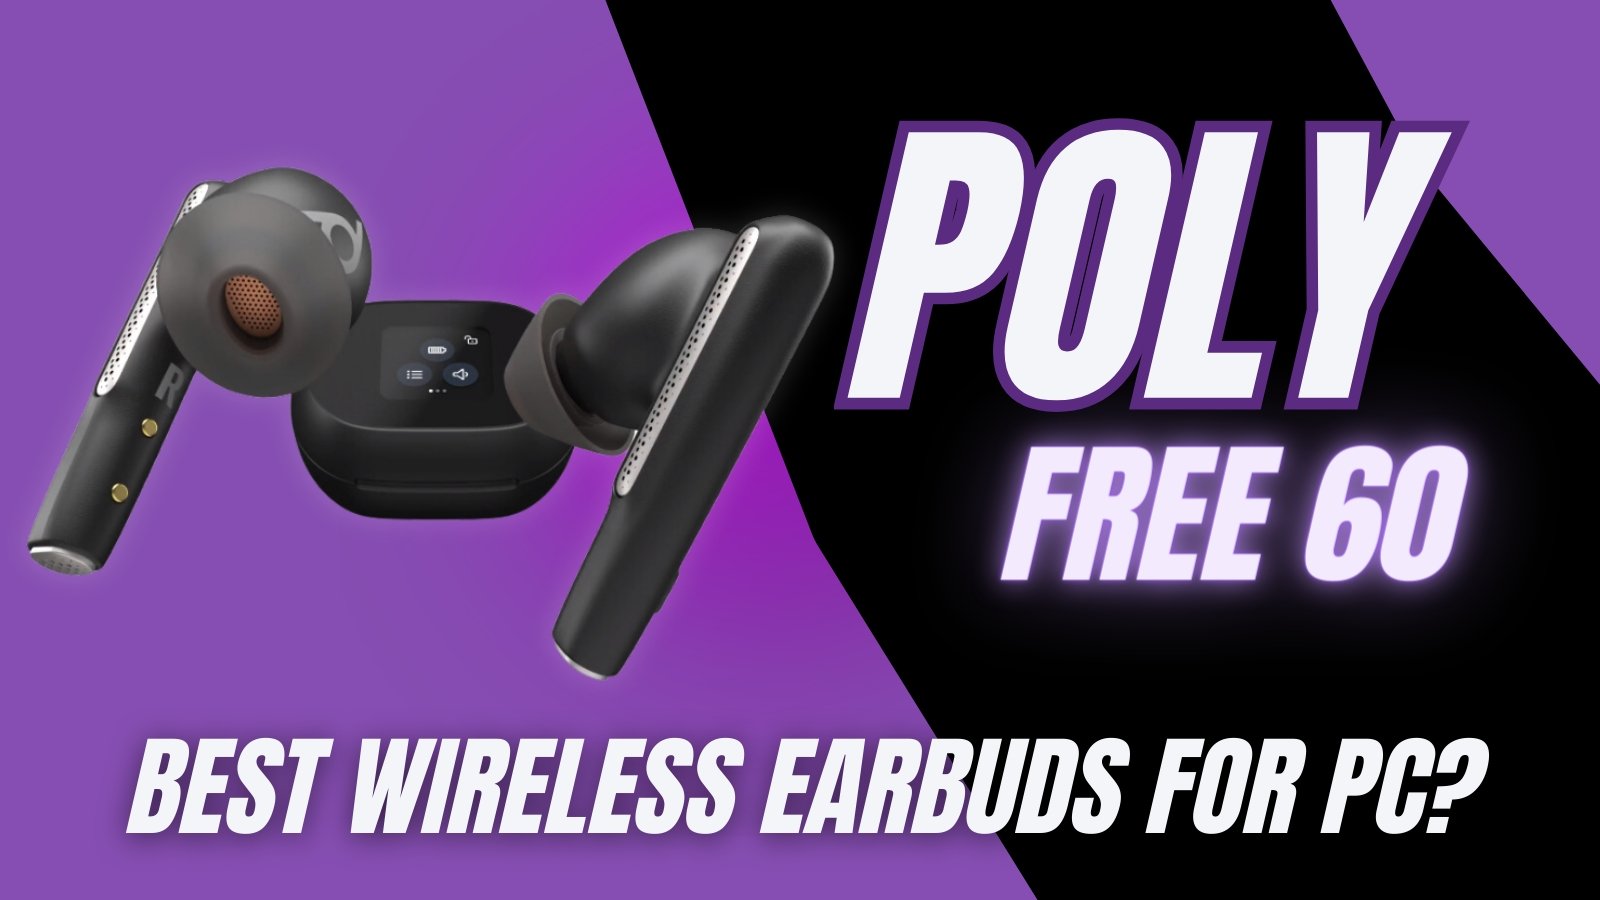 Are The Poly Voyager Free 60 The Best Earbuds For PC? - Headset Advisor